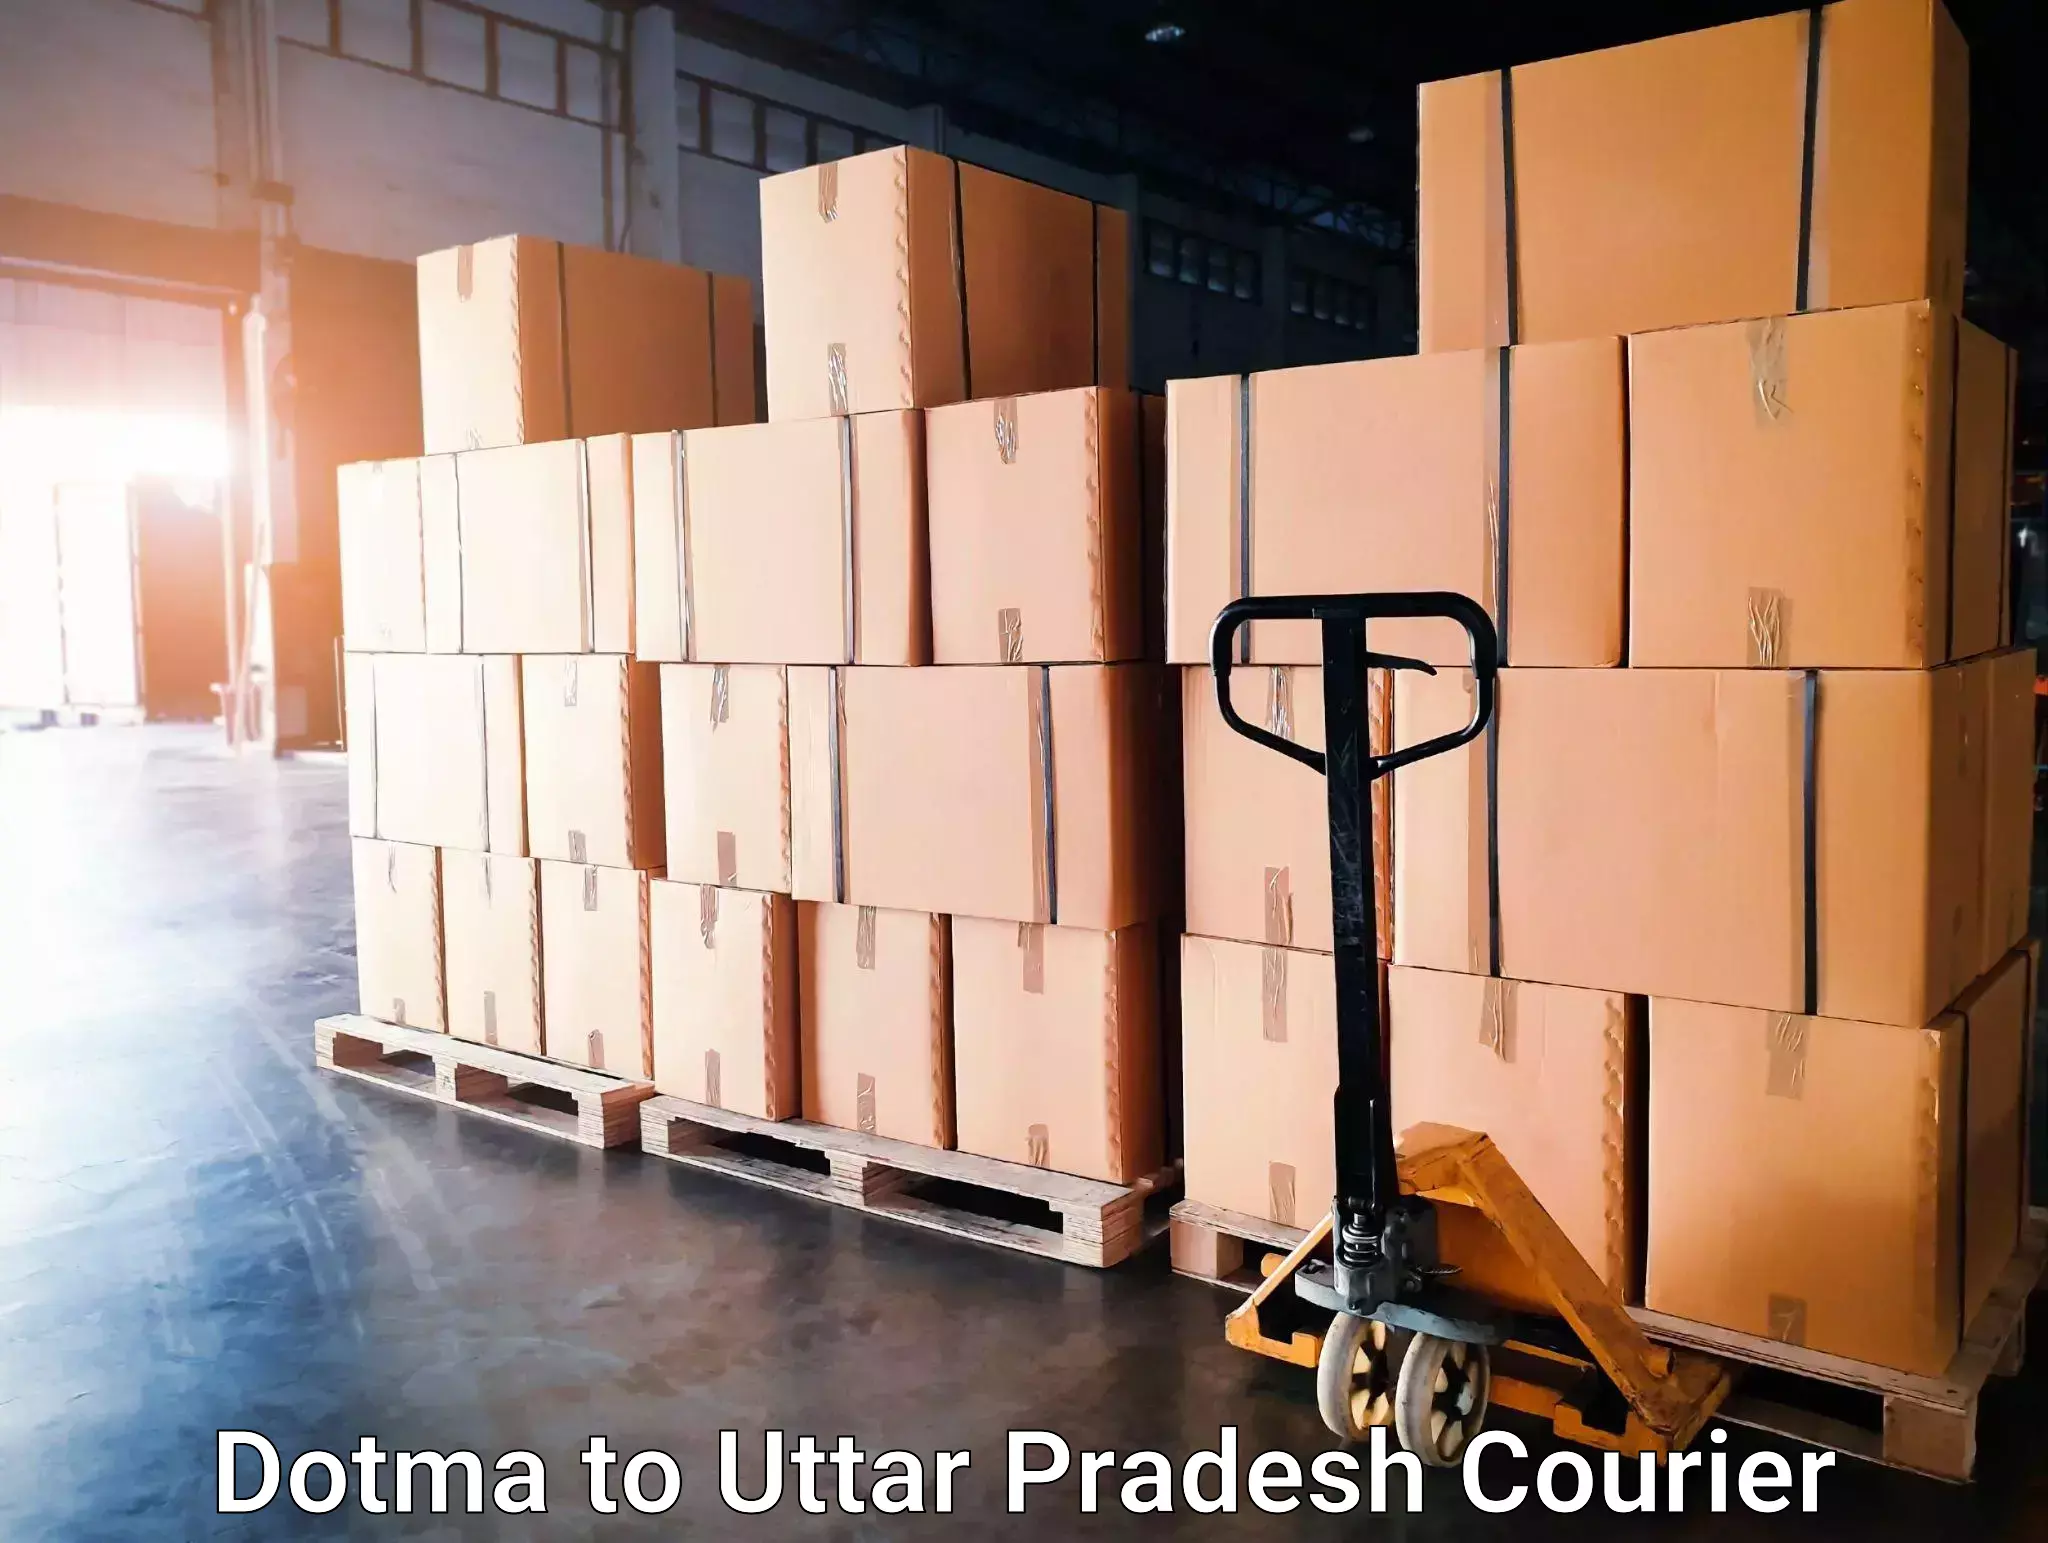 User-friendly courier app Dotma to Agra